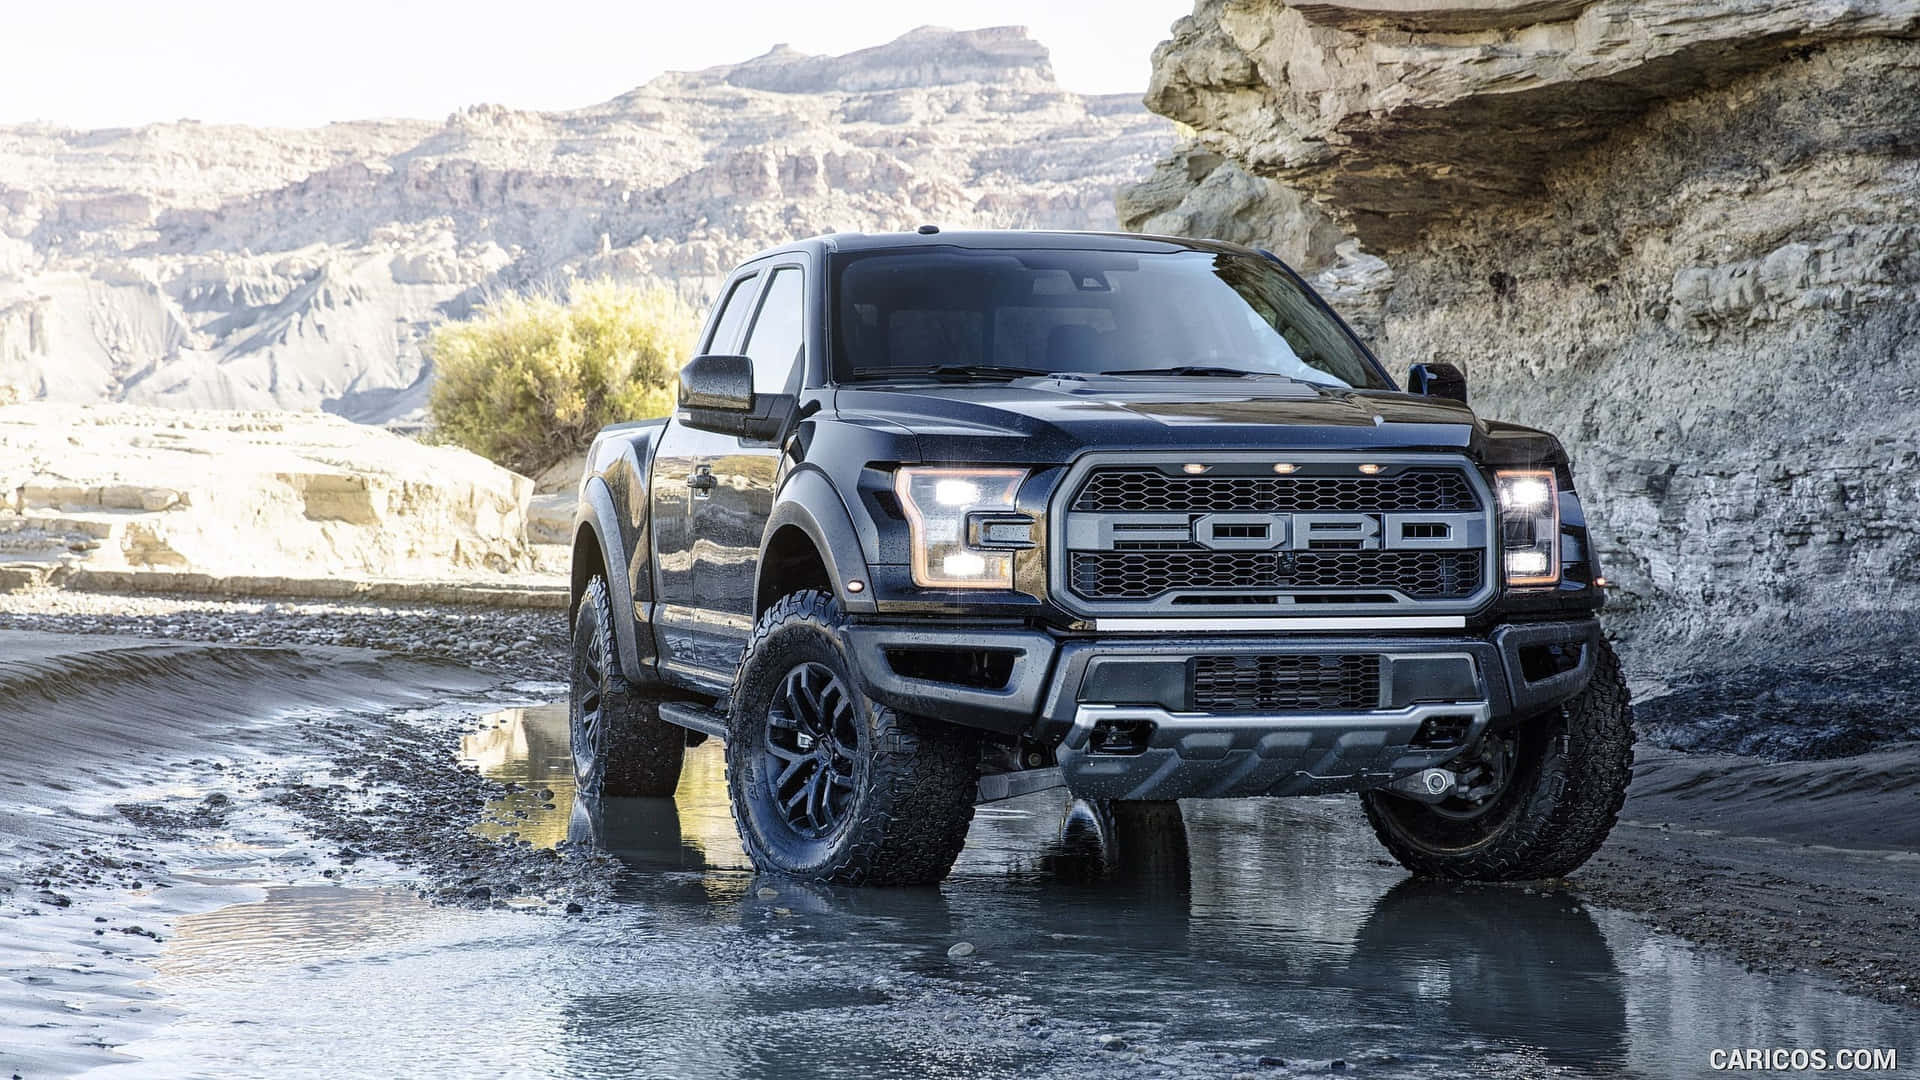 Powerful Ford Truck